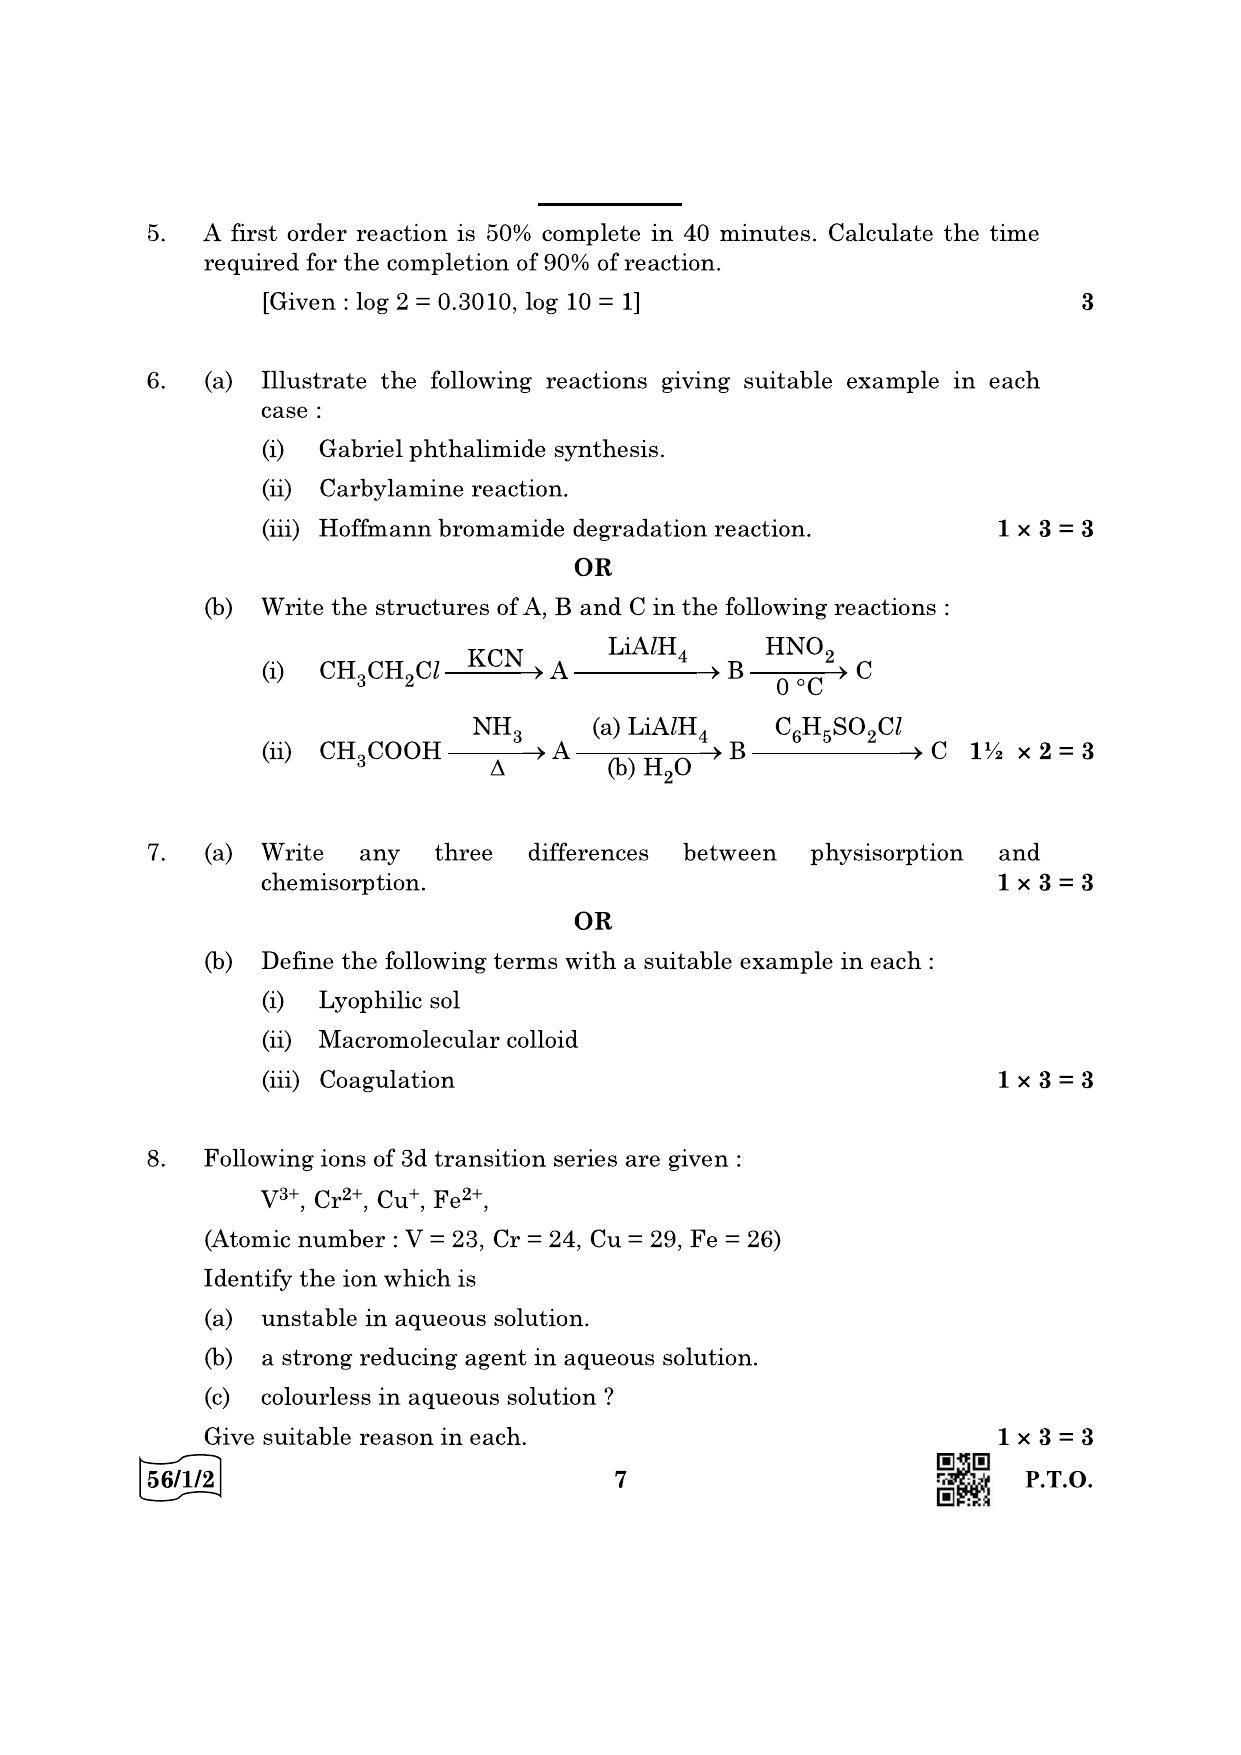 CBSE Class 12 56-1-2 Chemistry 2022 Question Paper - Page 7